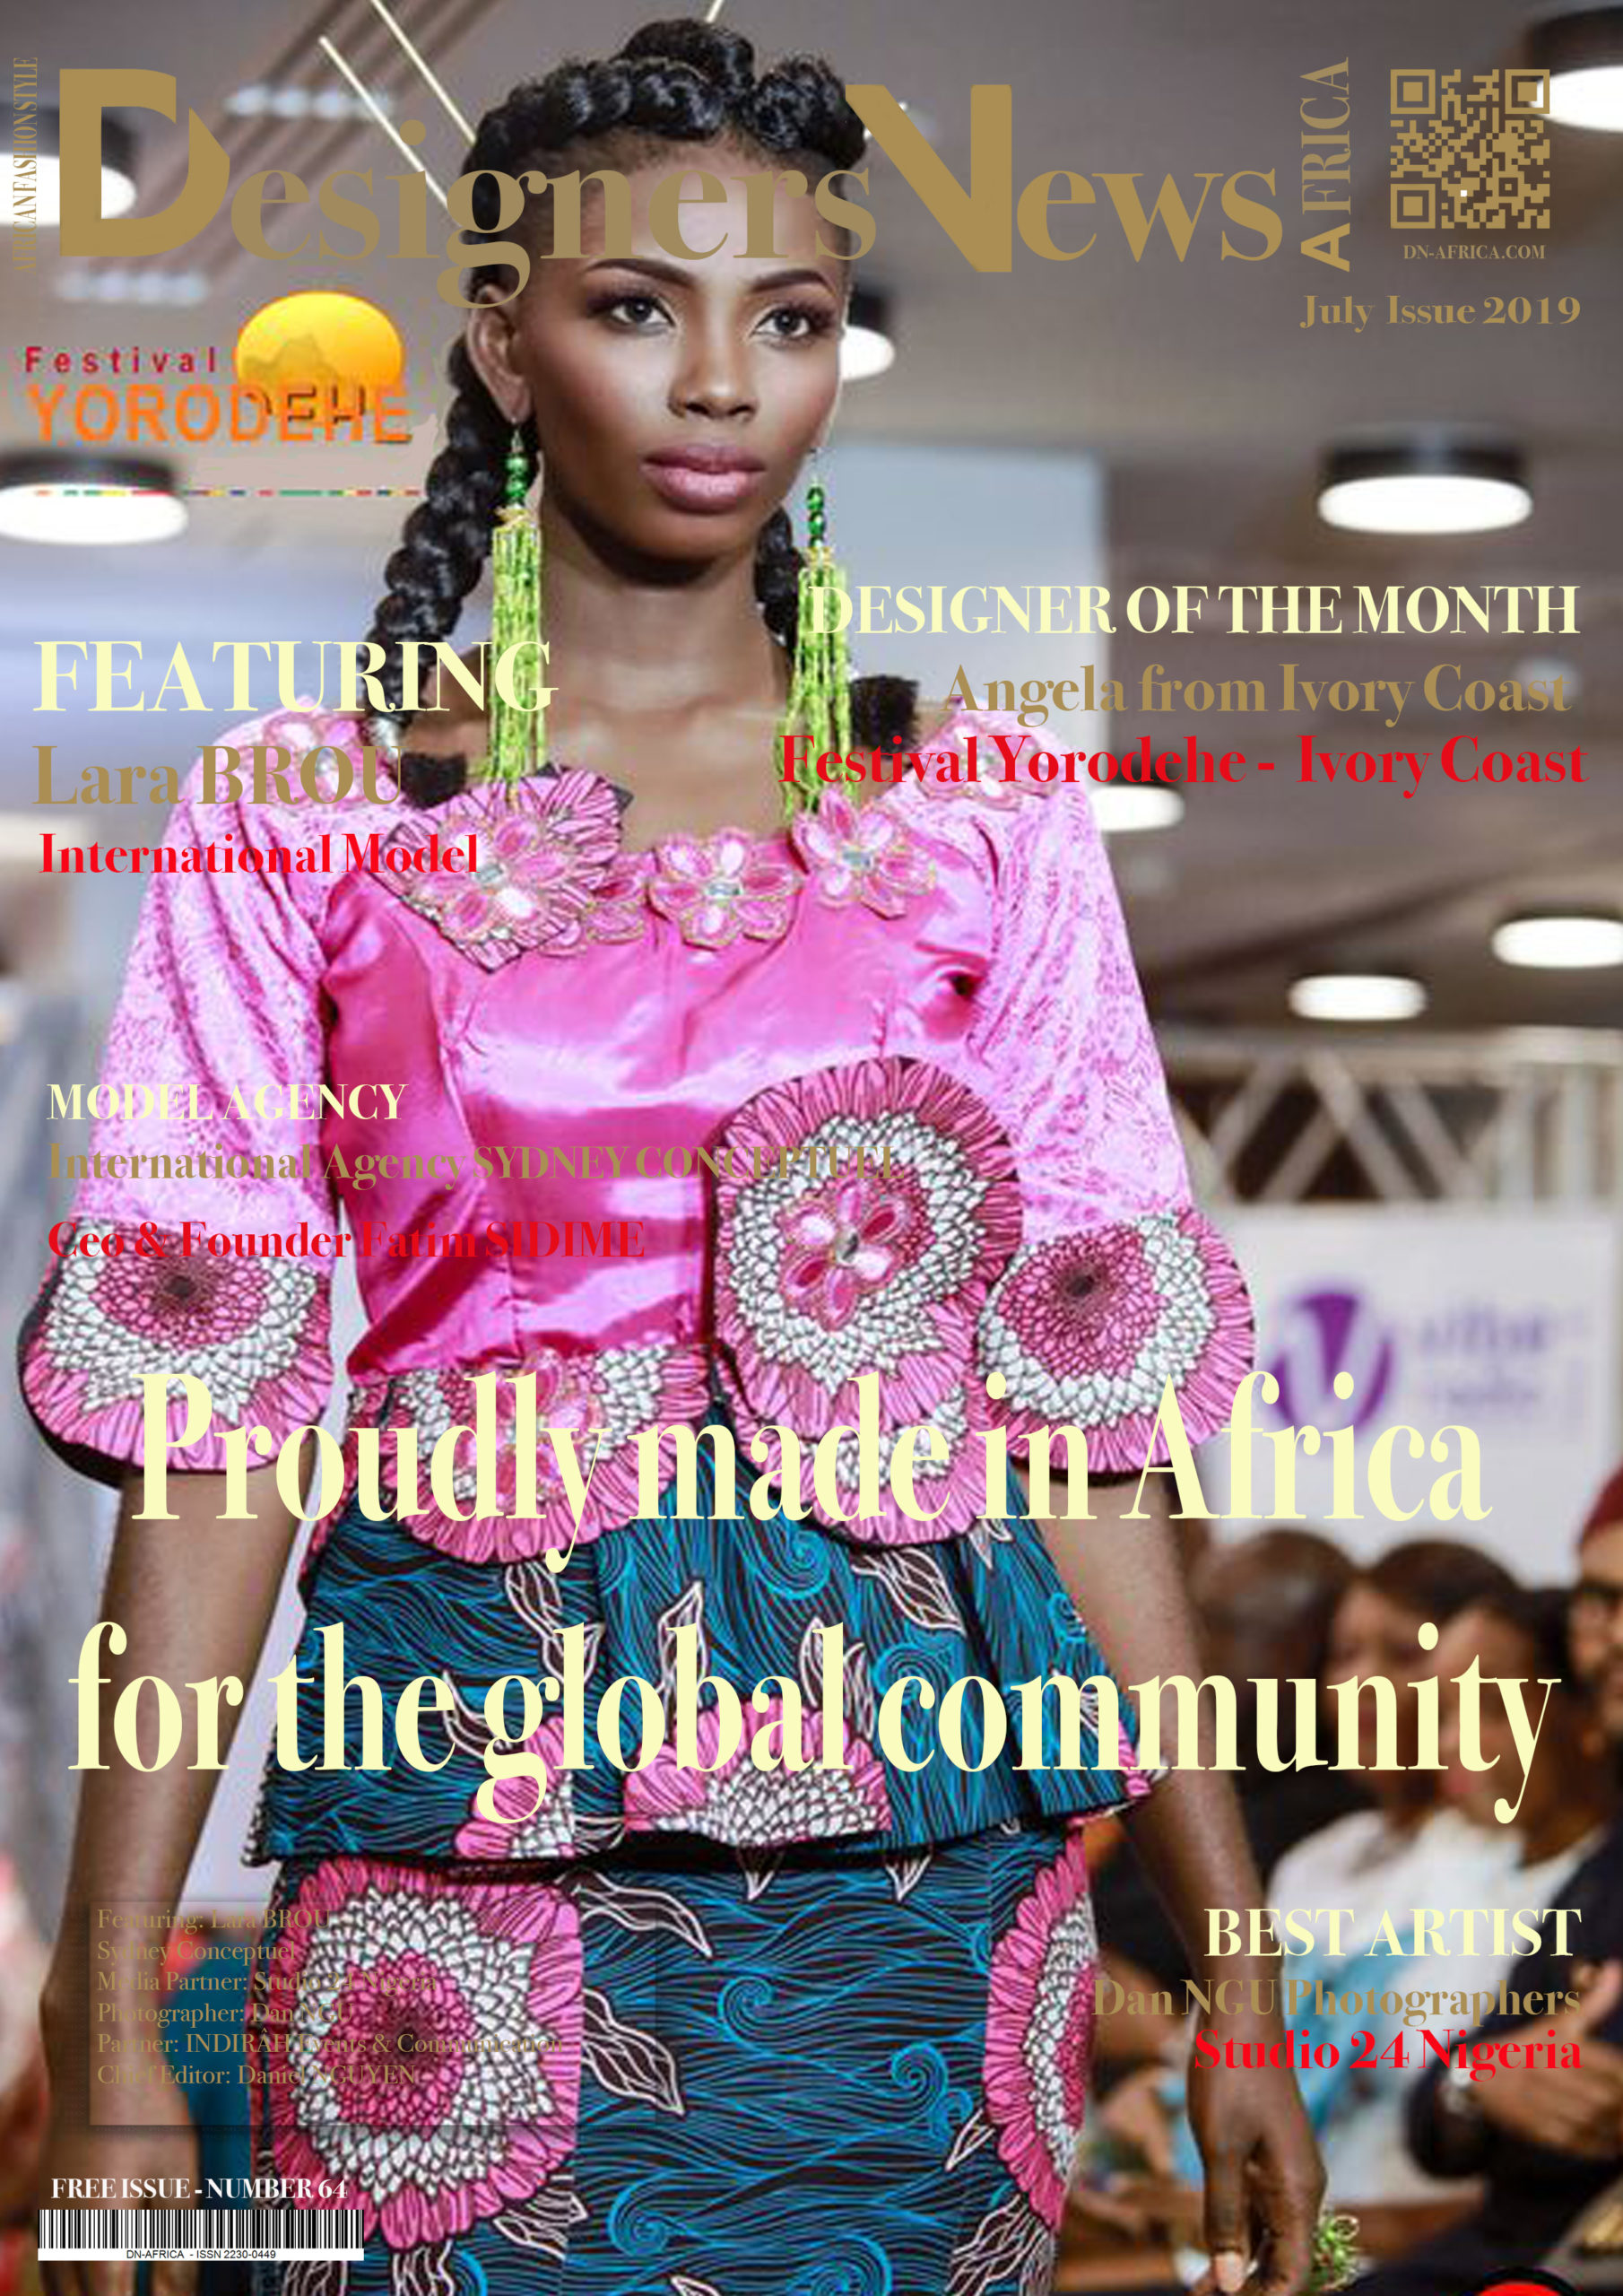 AFRICA-FASHION-STYLE-2490X3508-DN-AFRICA-COVER-NUMBER-64-JUL-6TH-2019-LARA-BROU-SYDNEY-CONCEPTUEL-MODEL-DN-AfrICA-Media-Partner